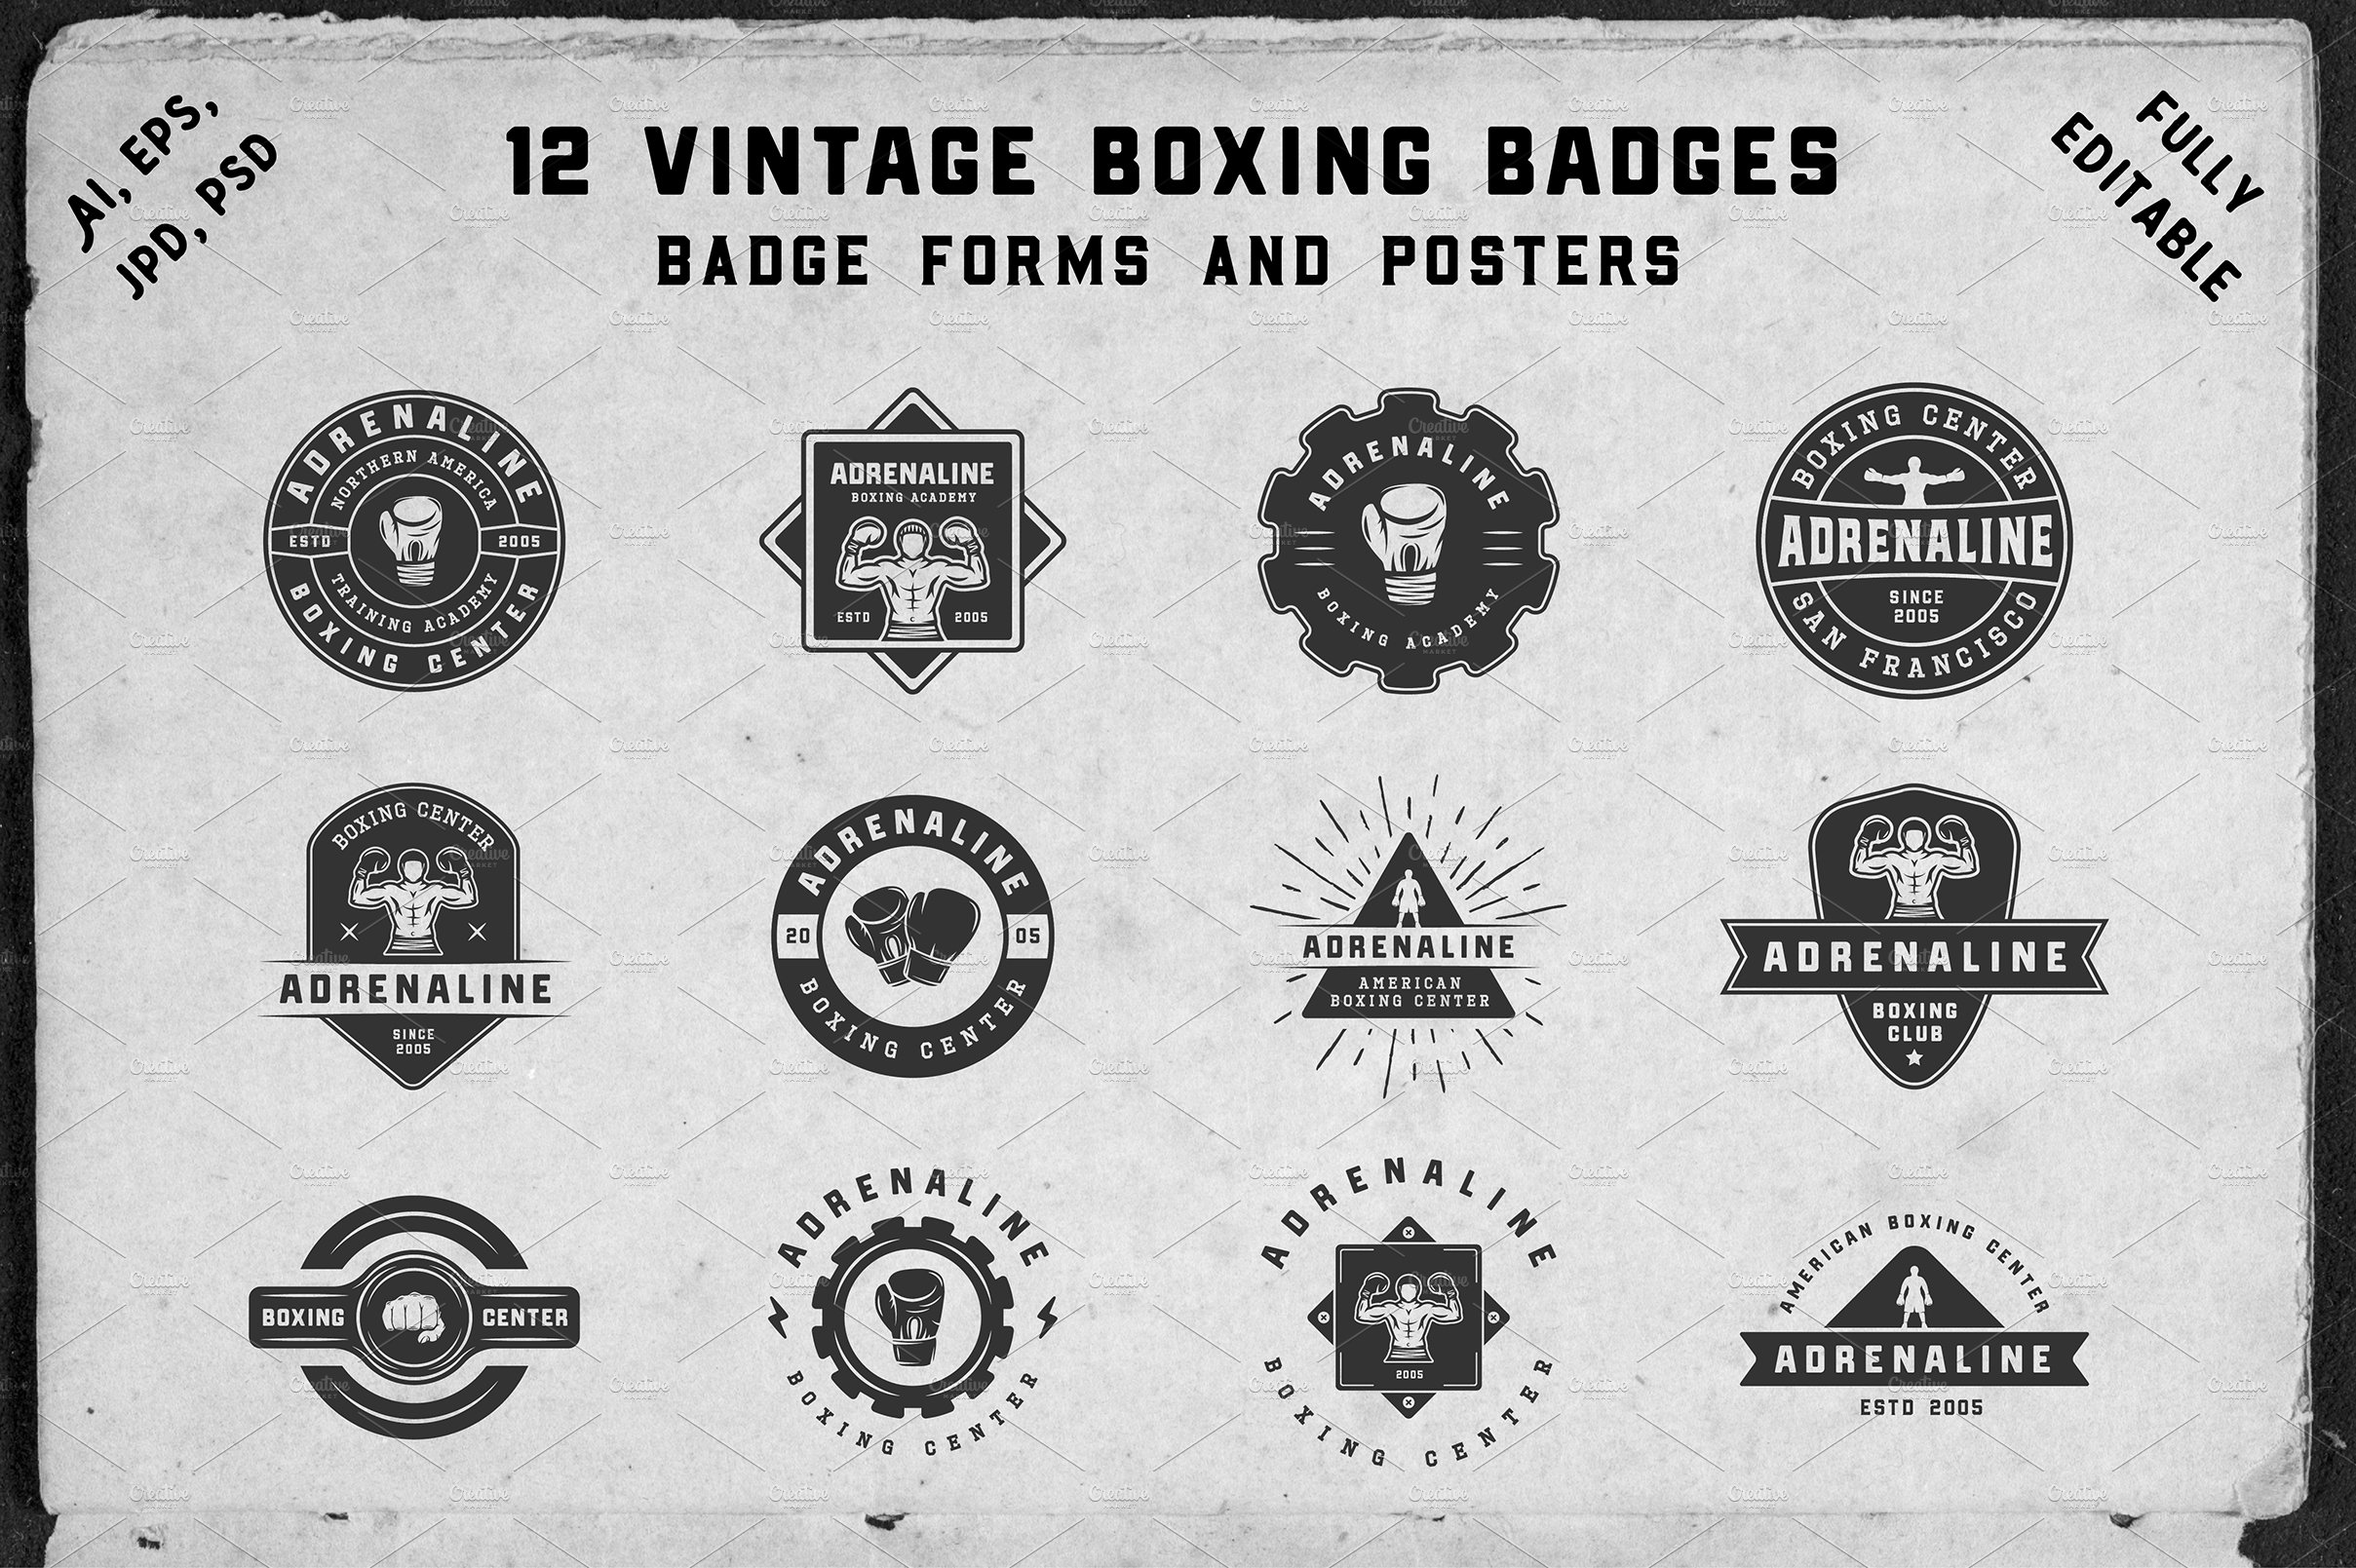 12 vintage boxing badges and forms cover image.